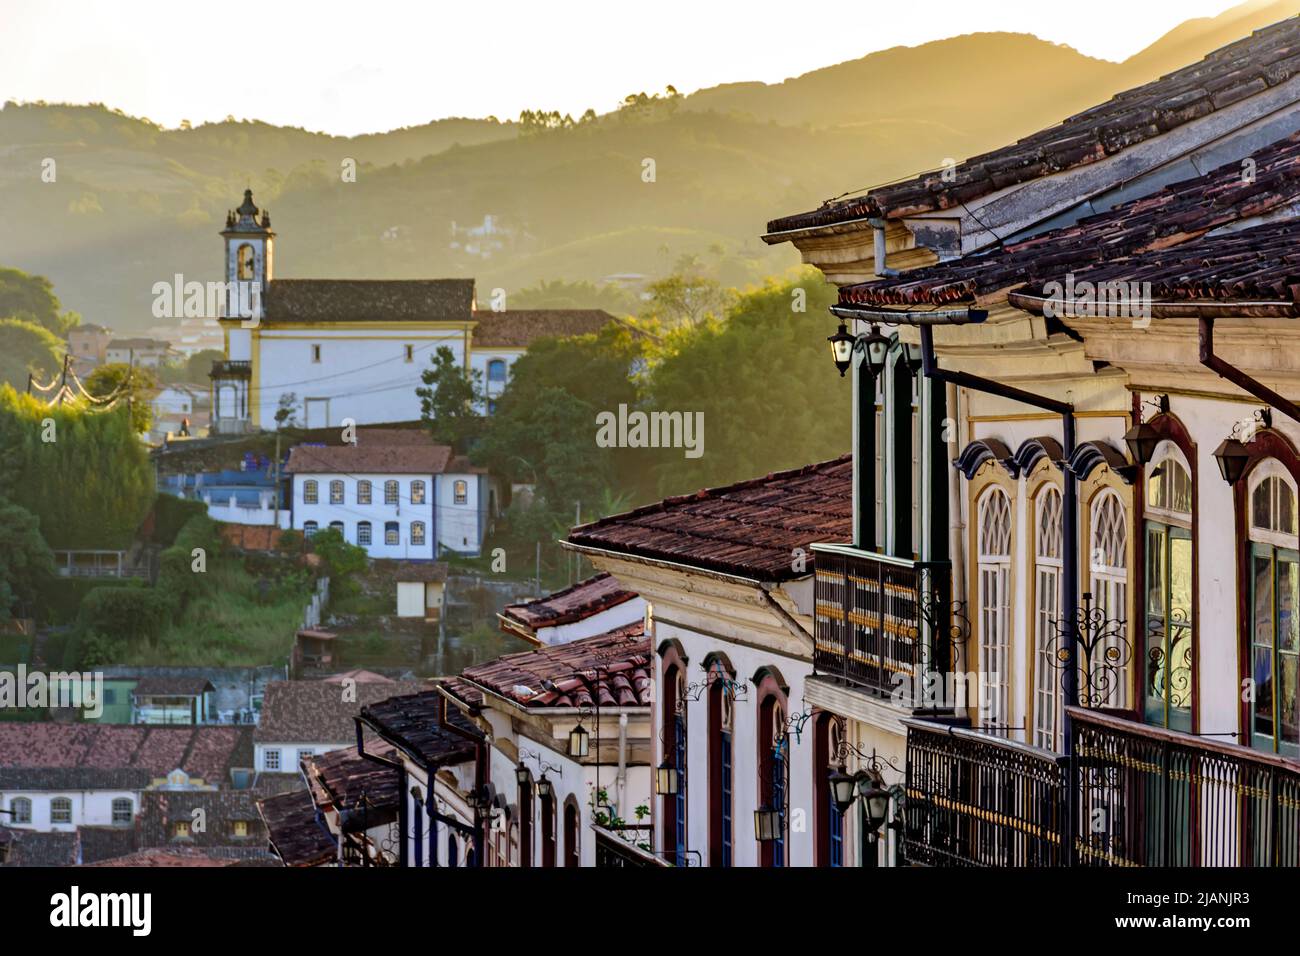 View of historic colonial style houses and church in the background on the hills of Ouro Preto city, Minas Gerais state, Brazil Stock Photo